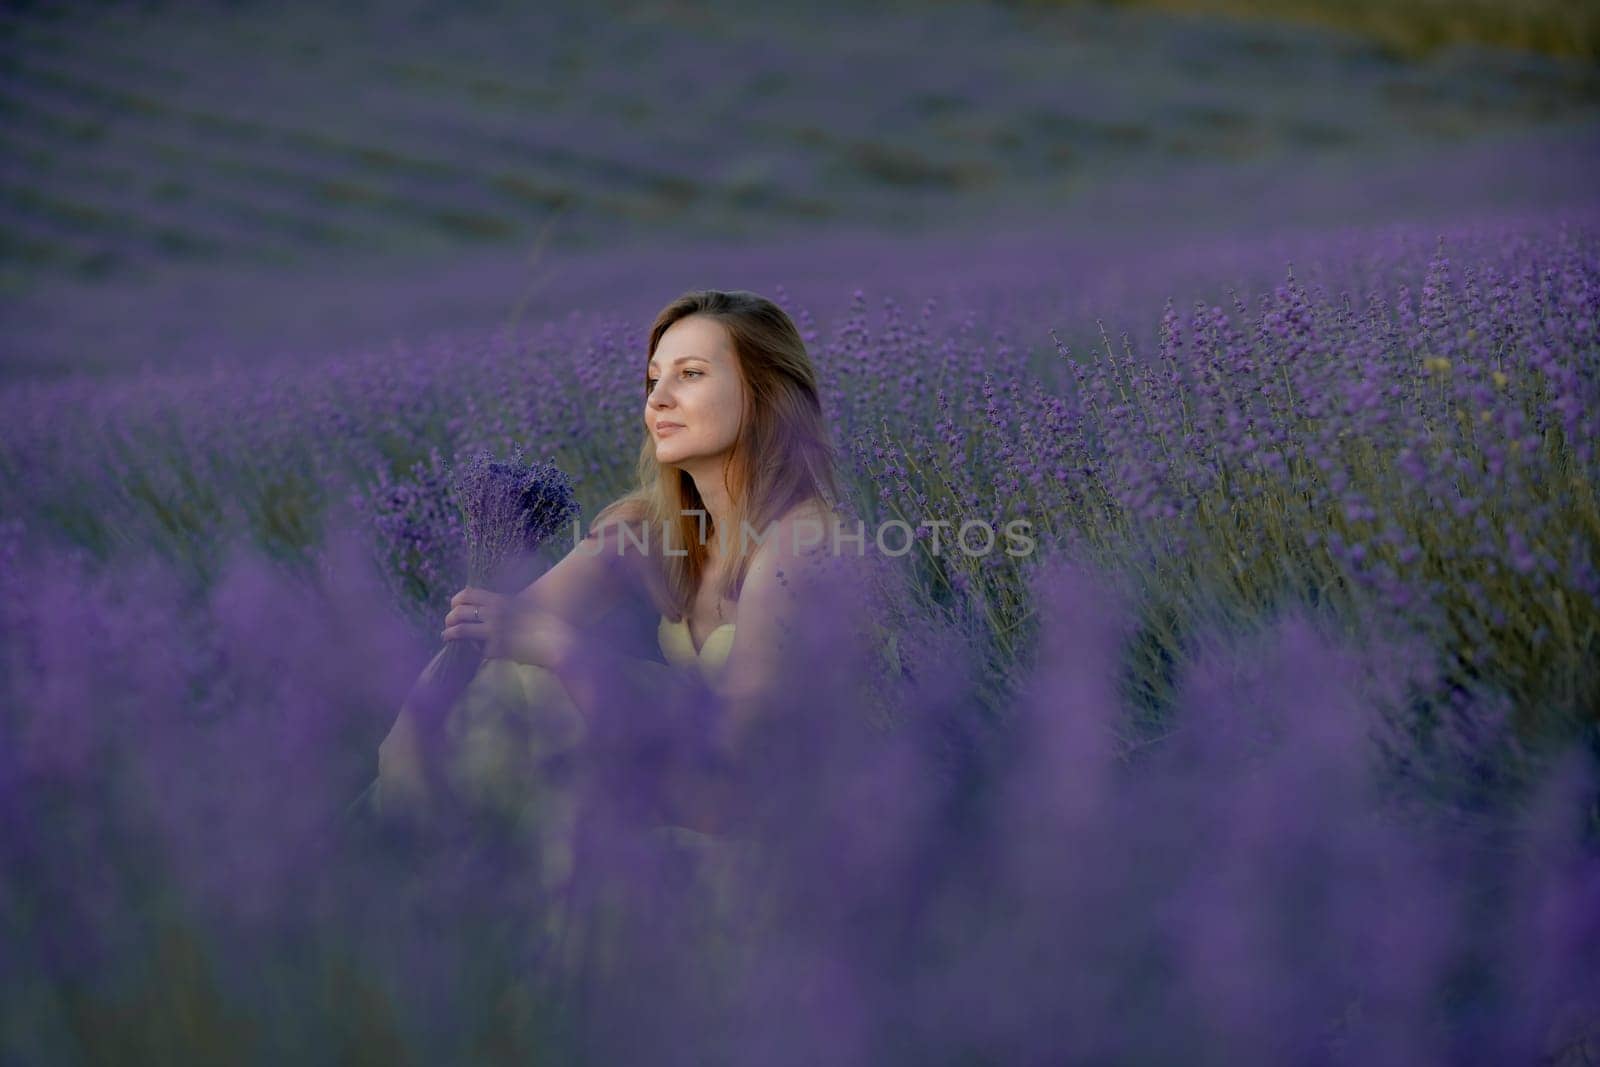 Woman poses in lavender field at sunset. Happy woman in yellow dress holds lavender bouquet. Aromatherapy concept, lavender oil, photo session in lavender.